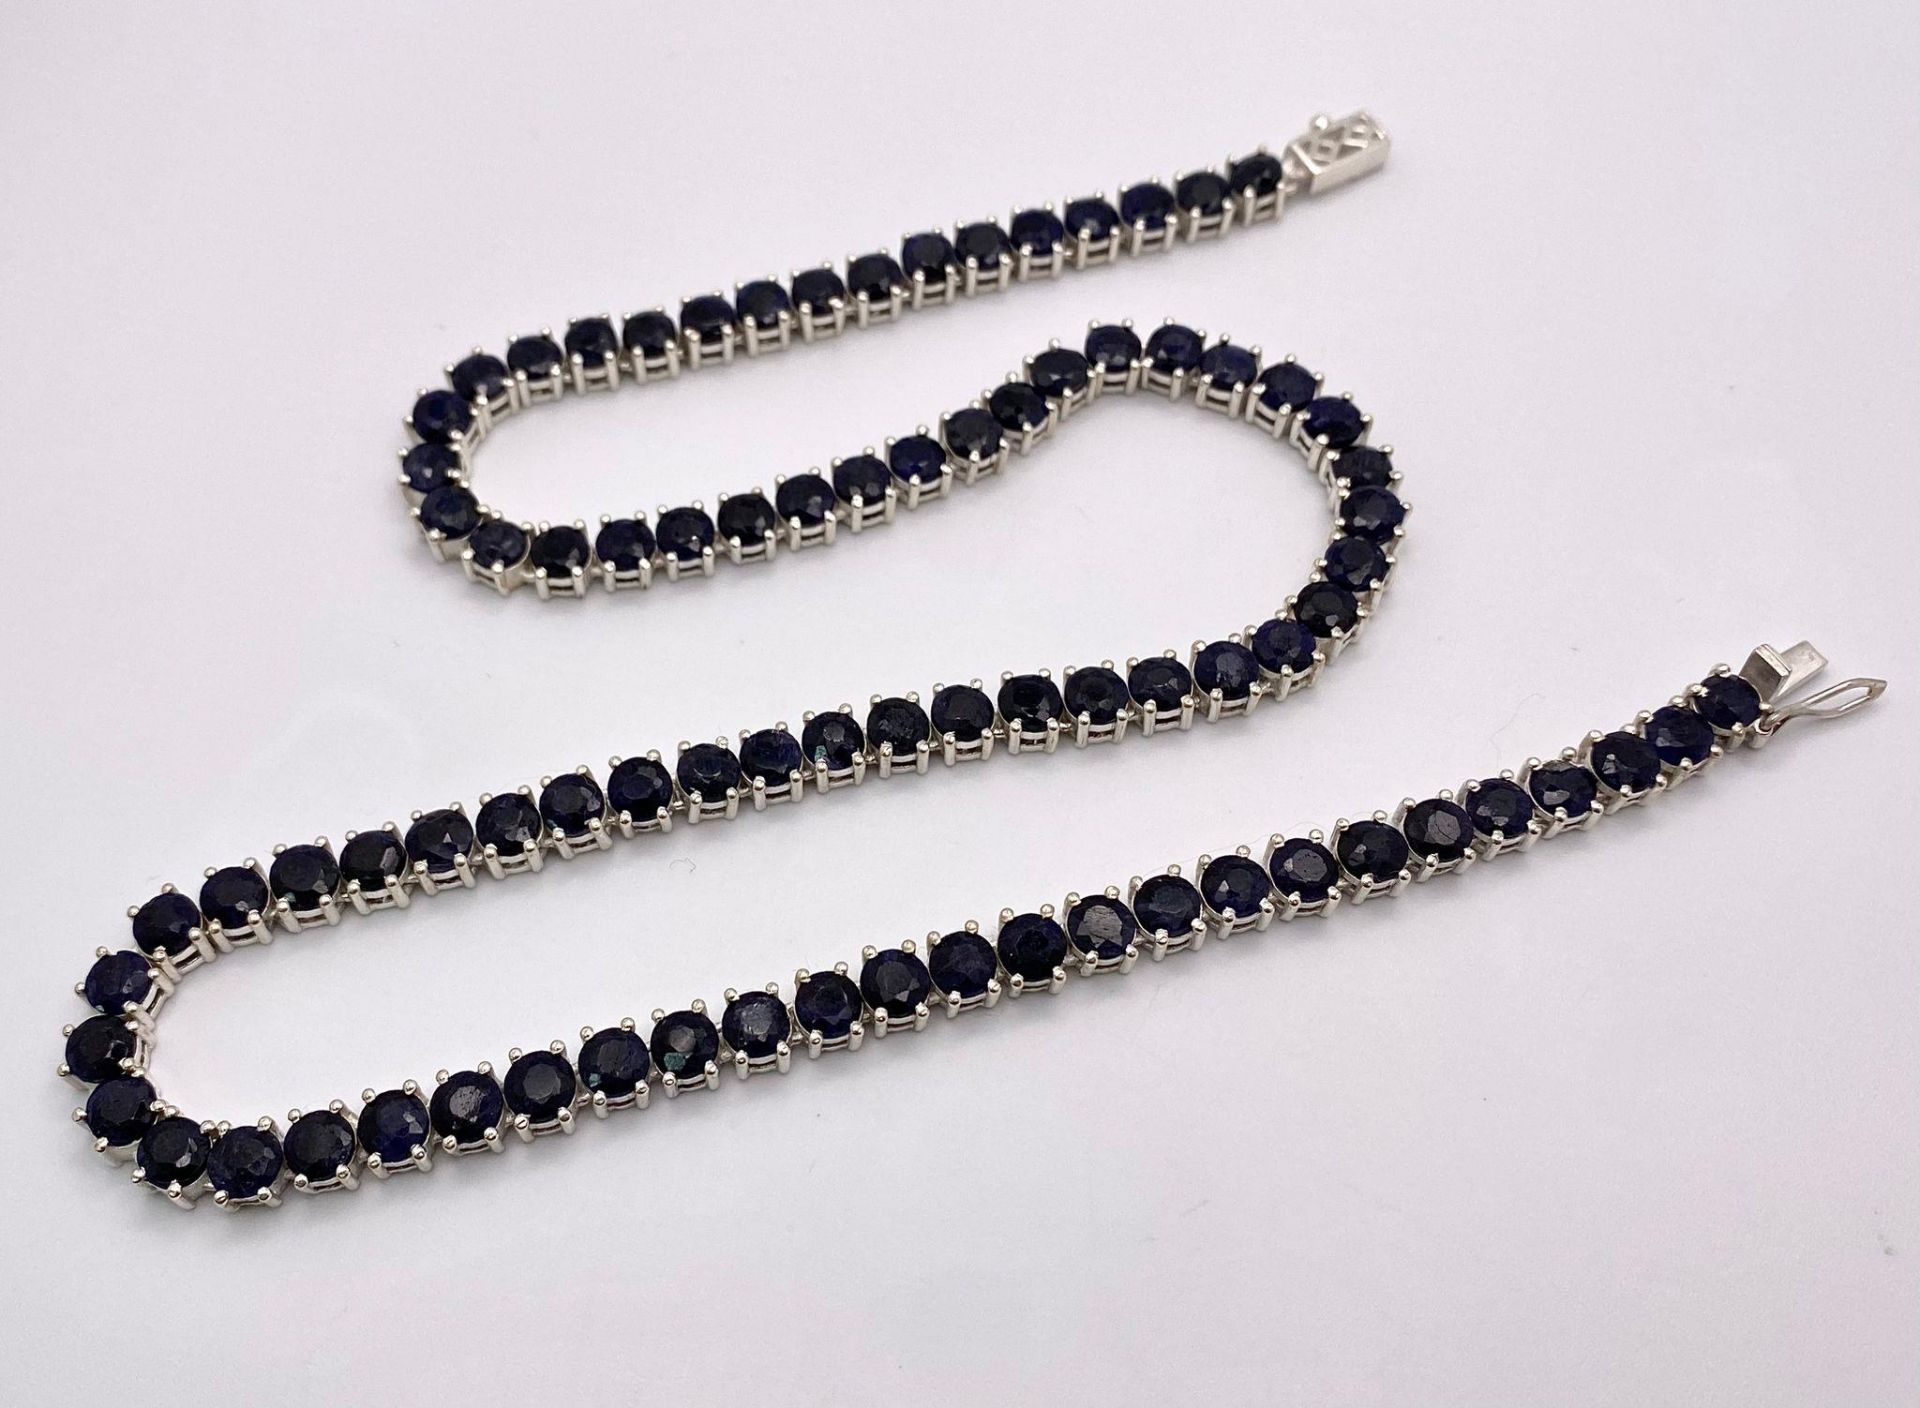 A Blue Sapphire Gemstone Tennis Necklace set in 925 Silver. 45cm length. 40.15g total weight. - Image 3 of 4